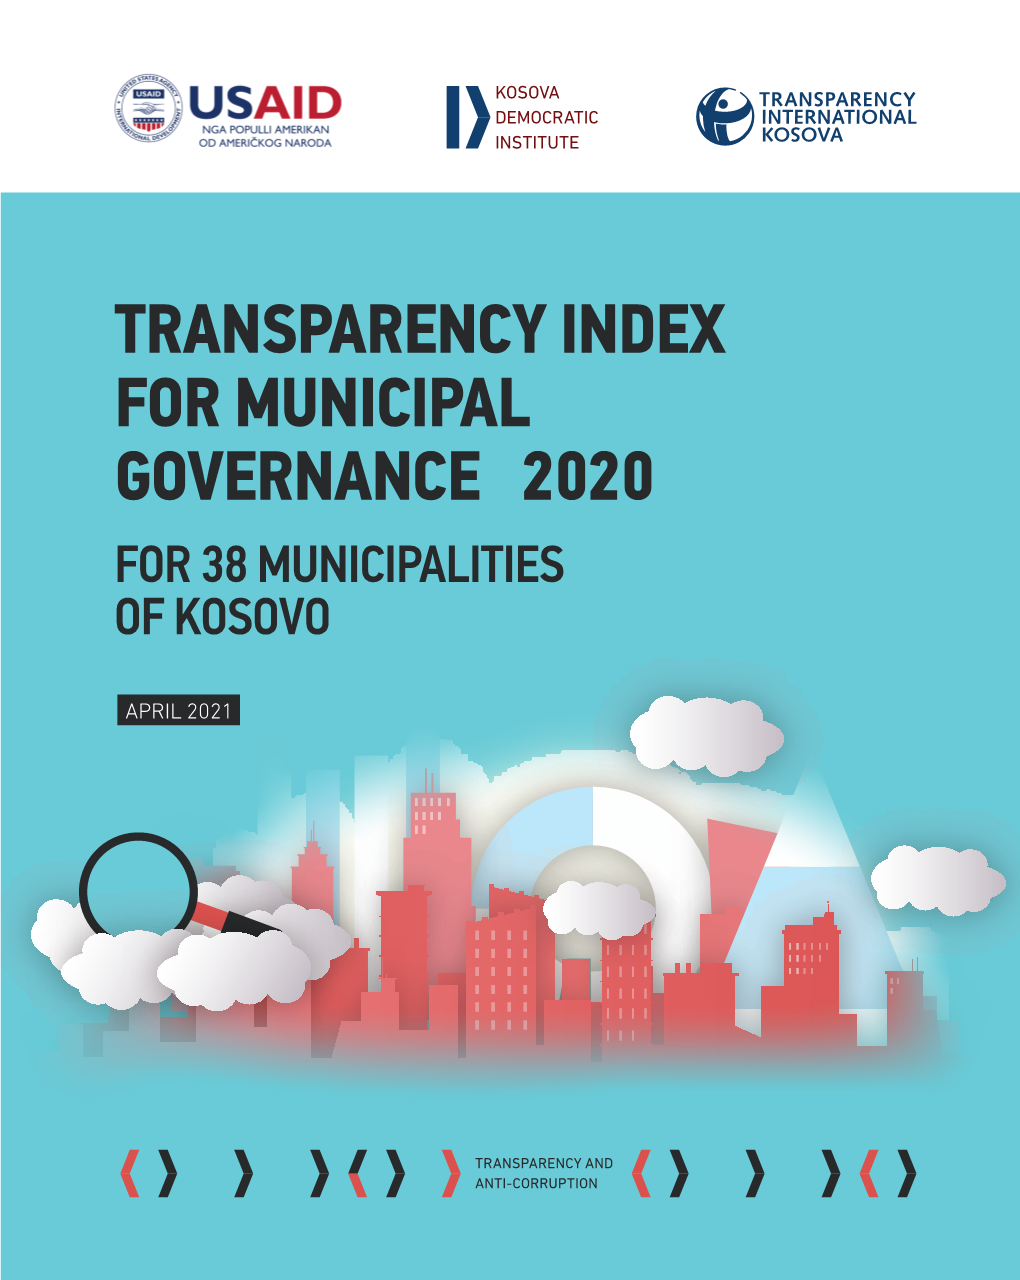 Transparency Index for Municipal Governance 2020 for 38 Municipalities of Kosovo